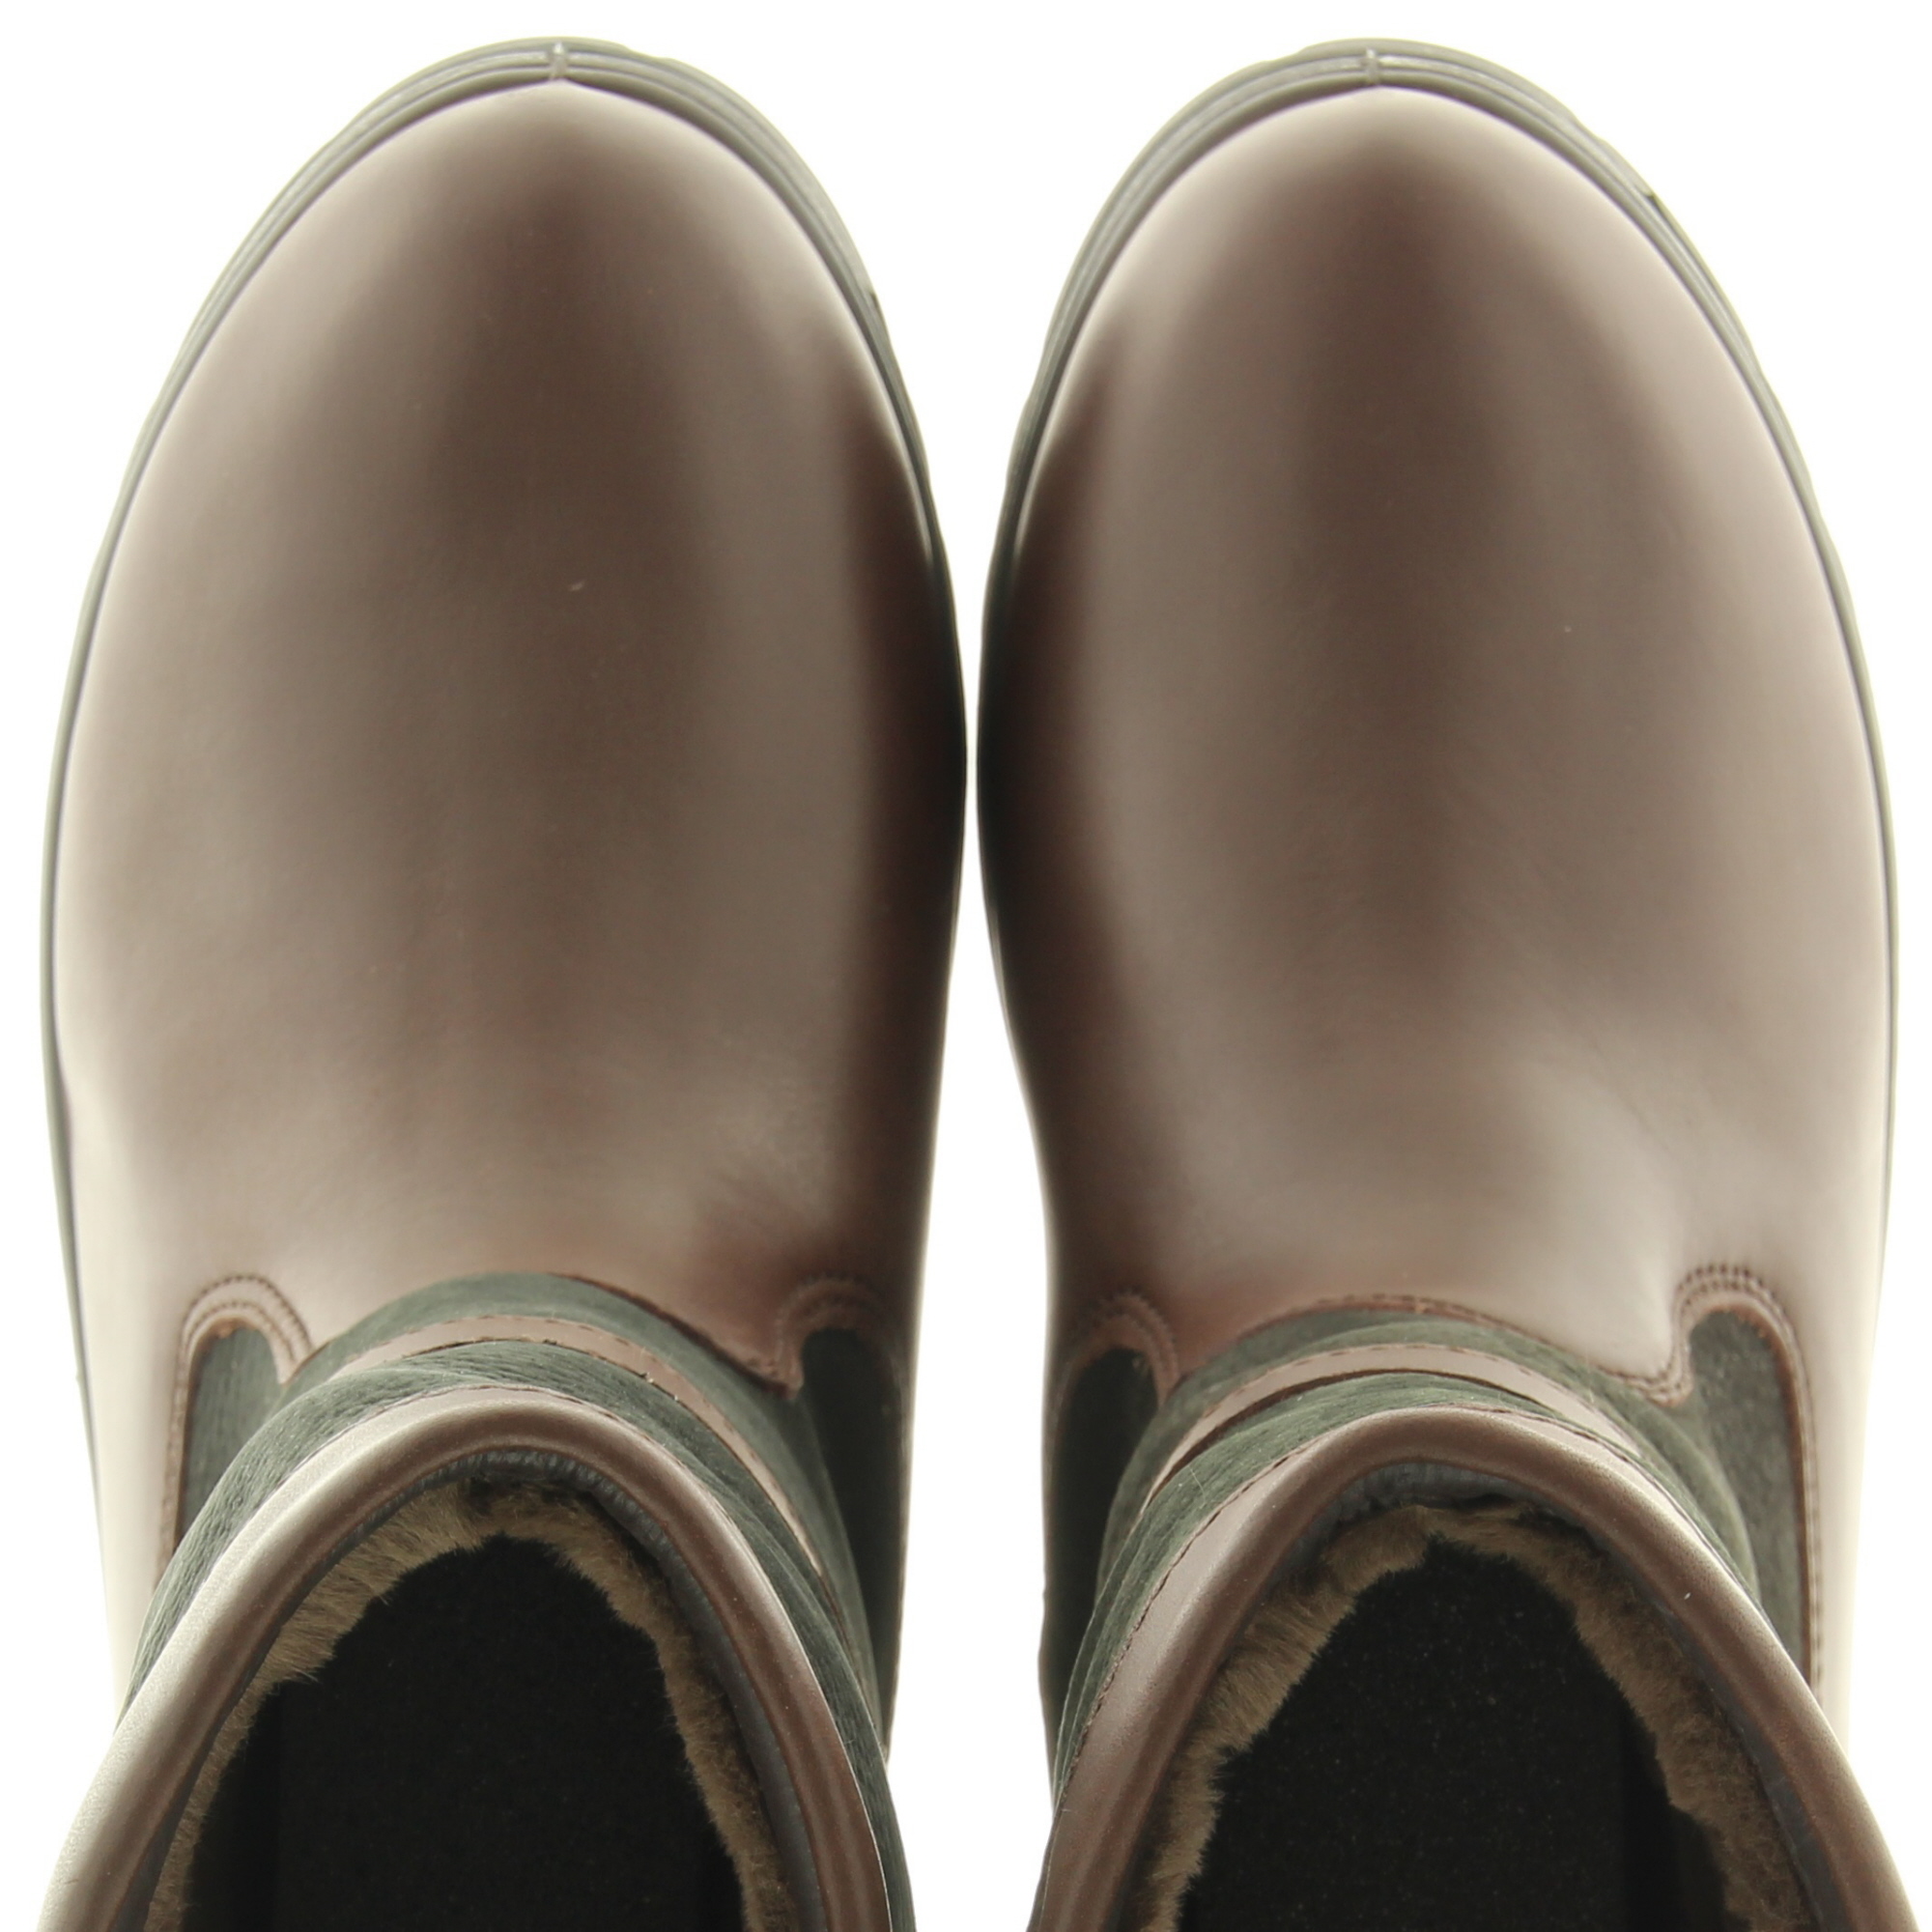 Dubarry Donegal 3766 12 Black/Brown